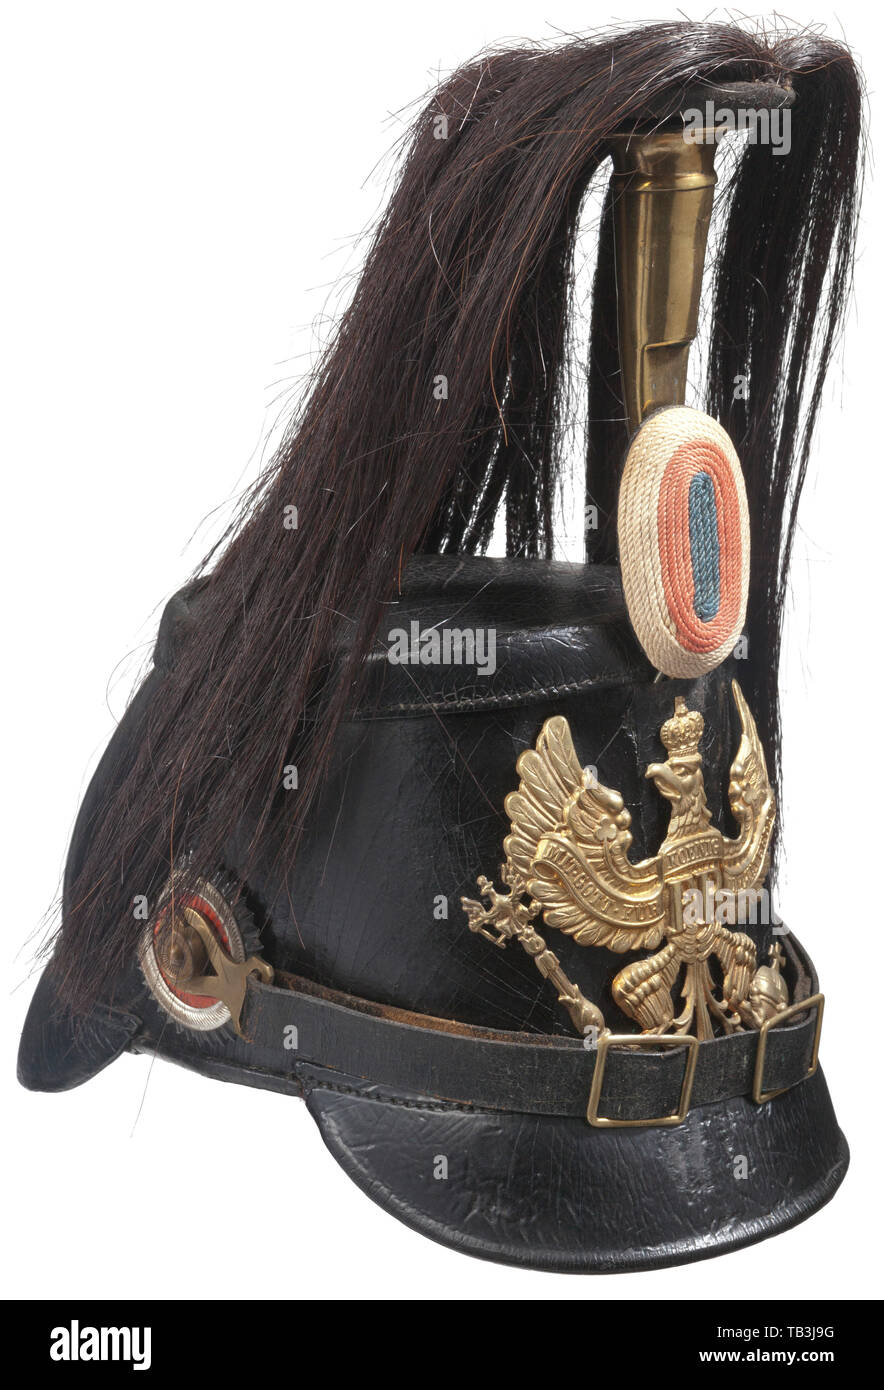 An Imperial German NCO pre-war shako for Jäger Battalion No. 7 Schaumburg-Lippe, Black leather body with front and back visors showing light crazing, brass Prussian line eagle front plate attached by two loops with leather inserts, white, red and blue field badge of Schaumburg-Lippe, black leather chinstrap with brass buckles attached to brass M 91 lug posts. NCO national colour cockade. Interior shows regimental markings and '1904'. USA-lot. Prussian, Prussia, German, Germany, militaria, military, object, objects, stills, clipping, clippings, cu, Additional-Rights-Clearance-Info-Not-Available Stock Photo